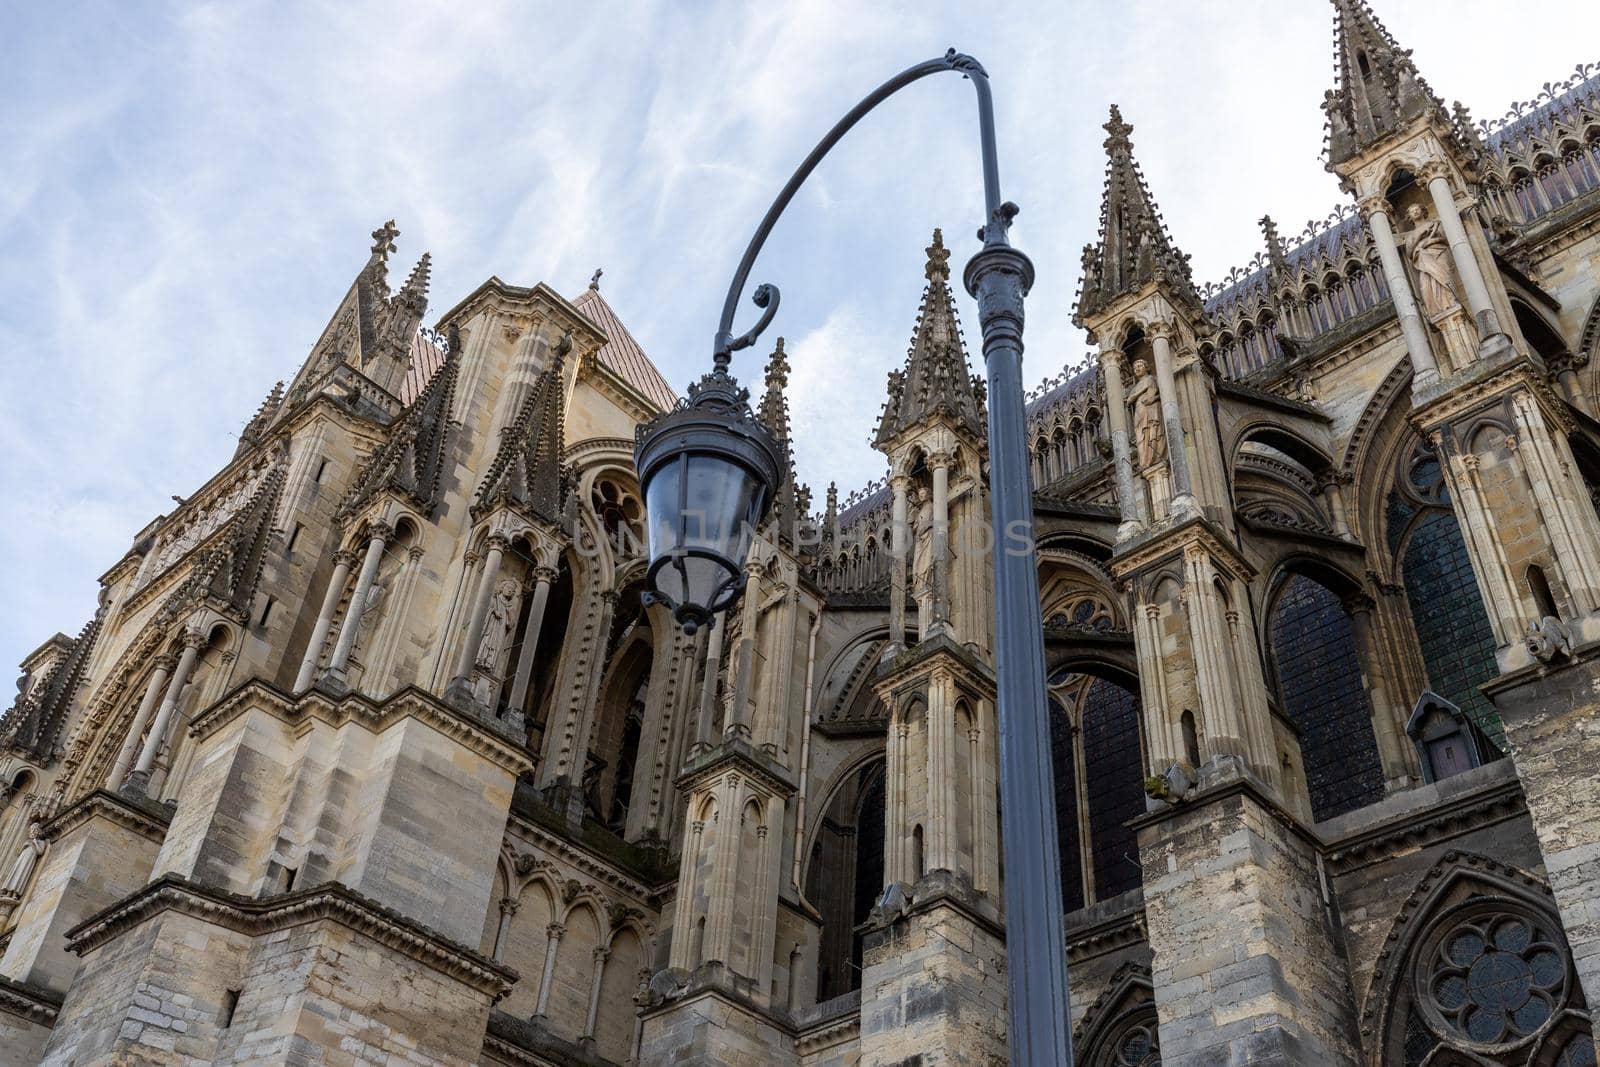 Low angle view at cathedral Notre Dame in Reims, France with street lamp in foreground